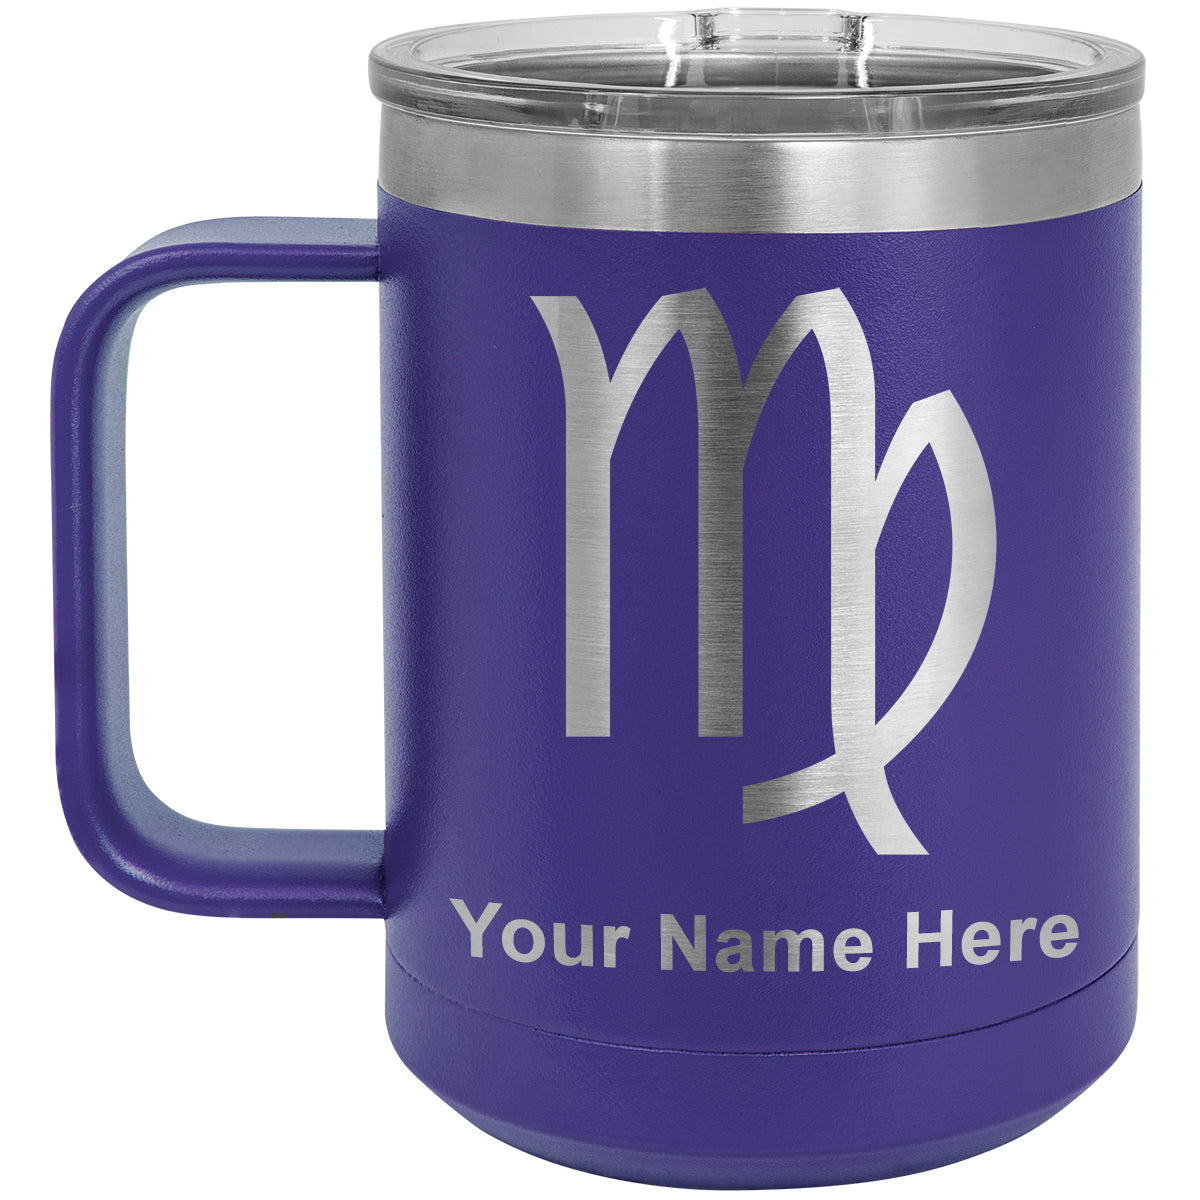 15oz Vacuum Insulated Coffee Mug, Zodiac Sign Virgo, Personalized Engraving Included